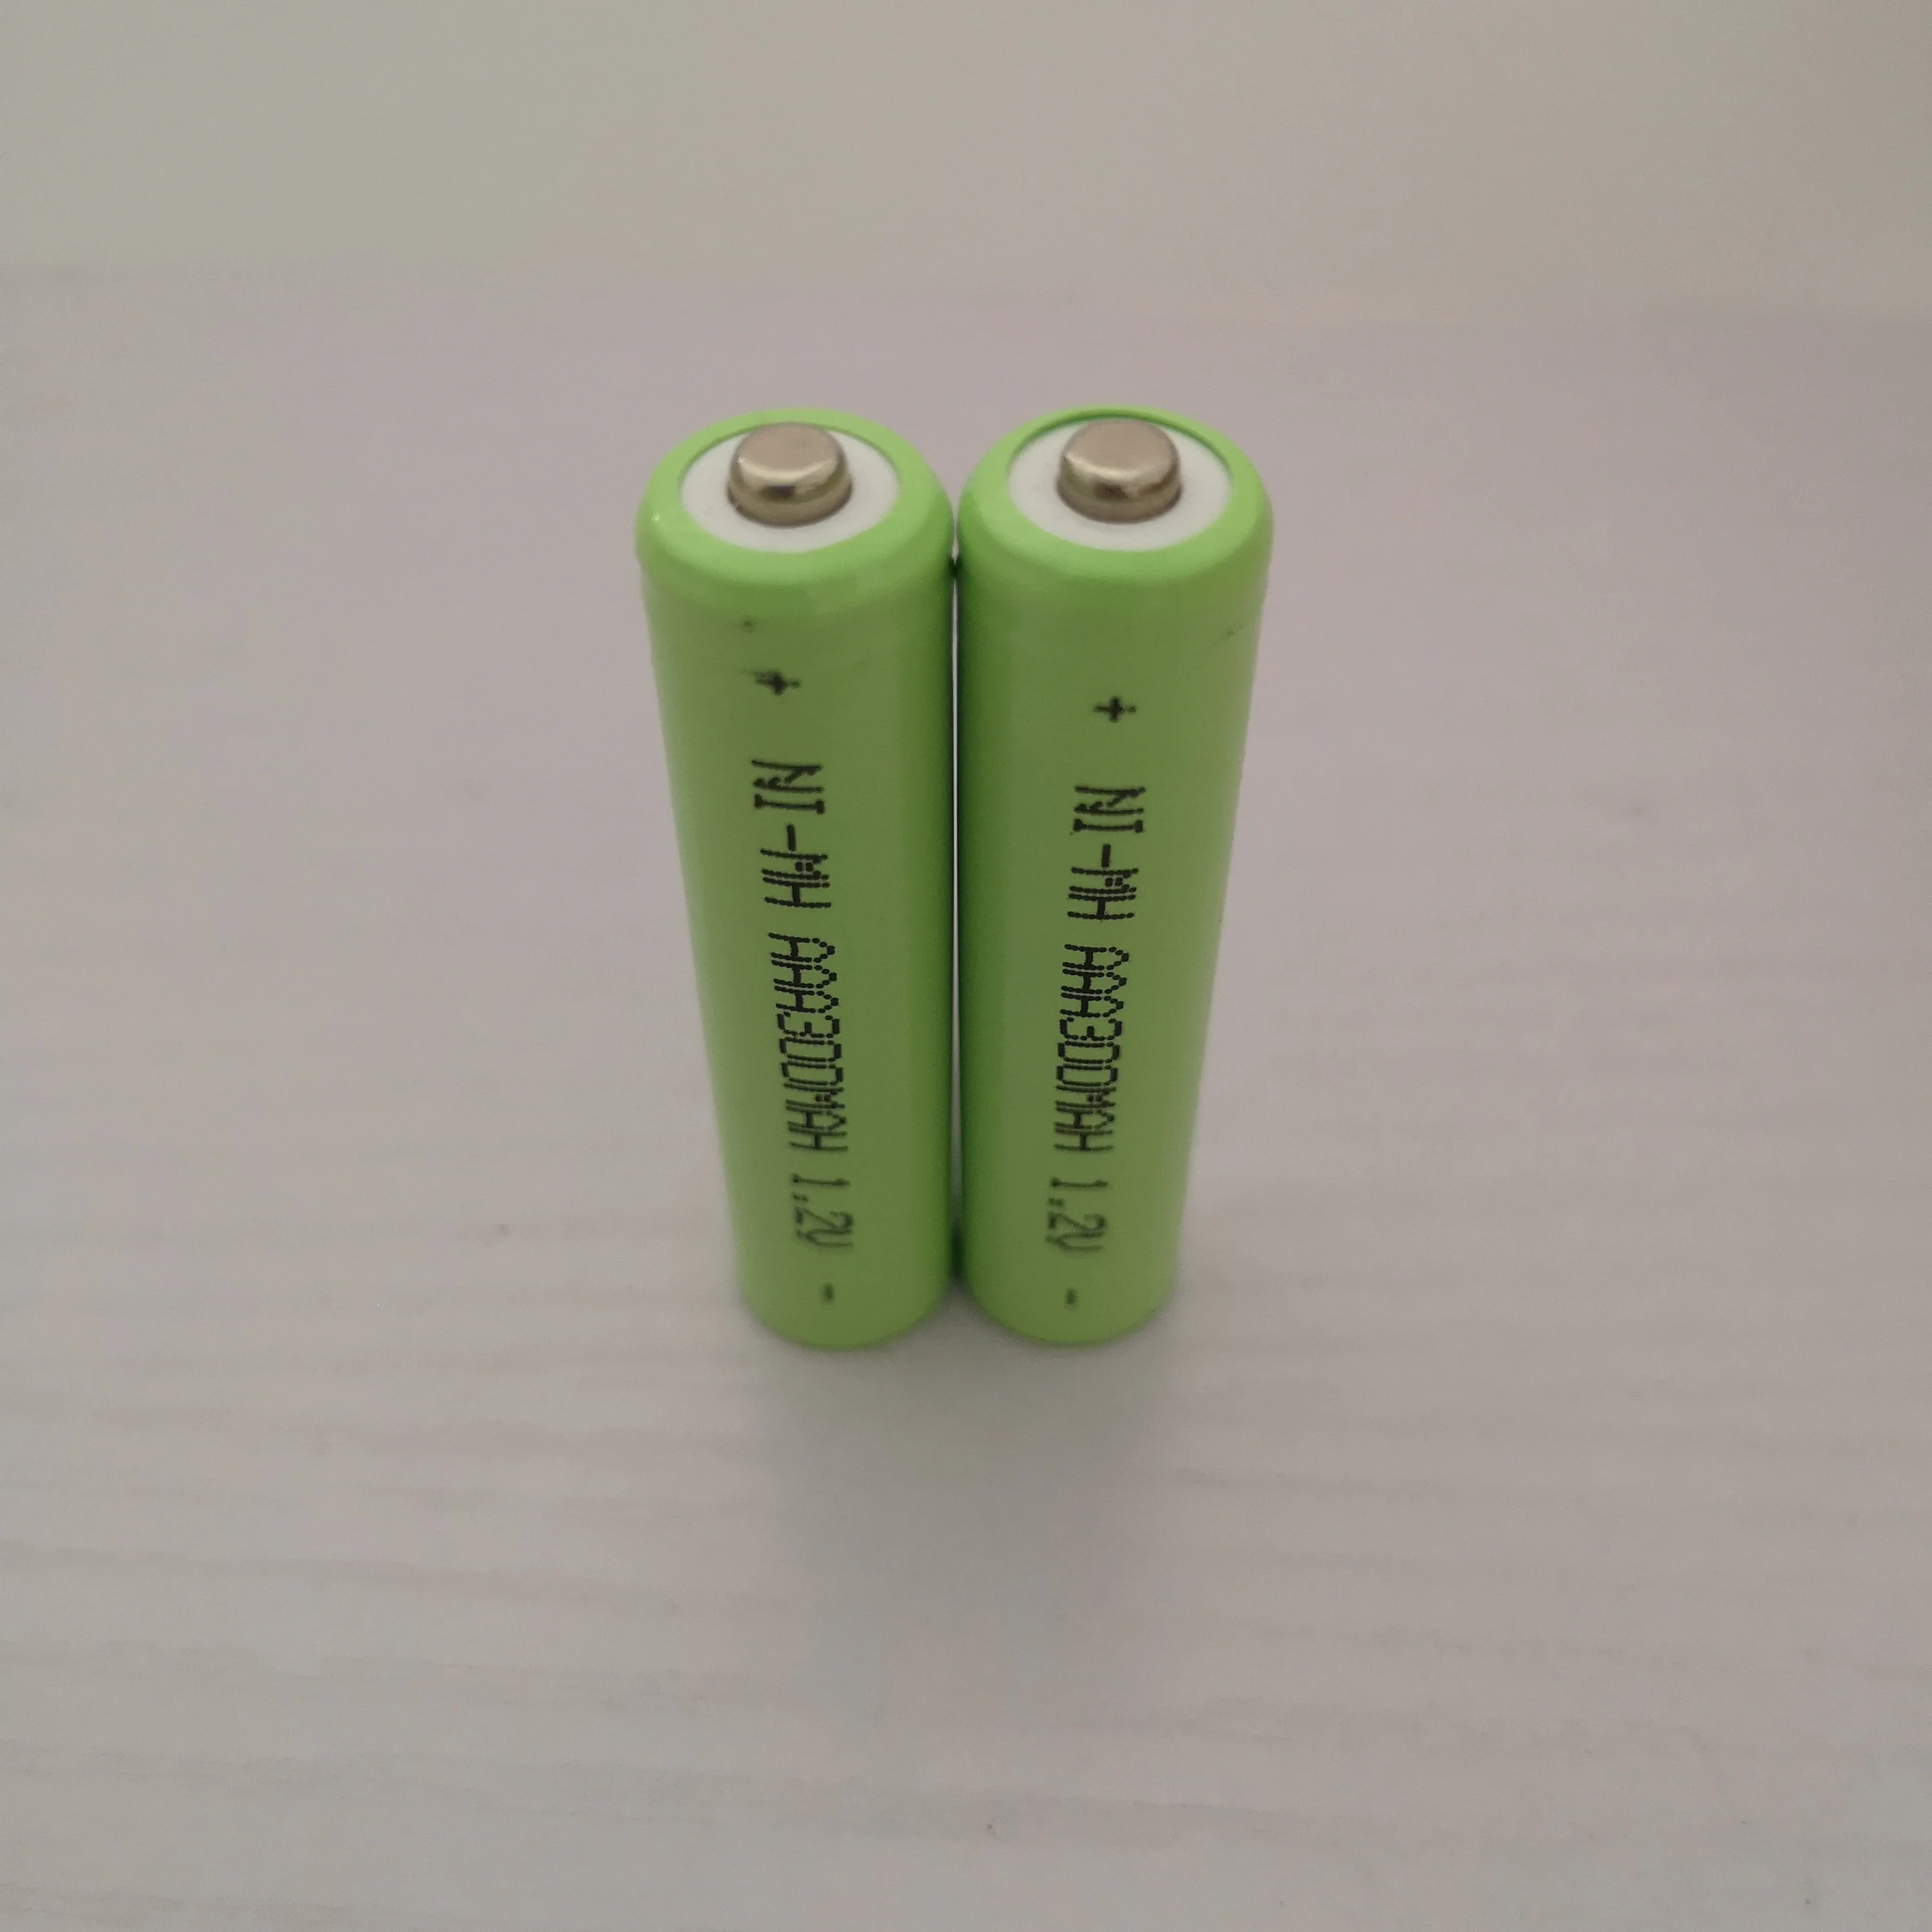 1-20Pcs 1.2V AA 800mAh Ni-MH Rechargeable Battery Ni-MH 2A Batteries for  Outdoor Gutter Garden Outdoor Lawn Fence Wall LED - AliExpress